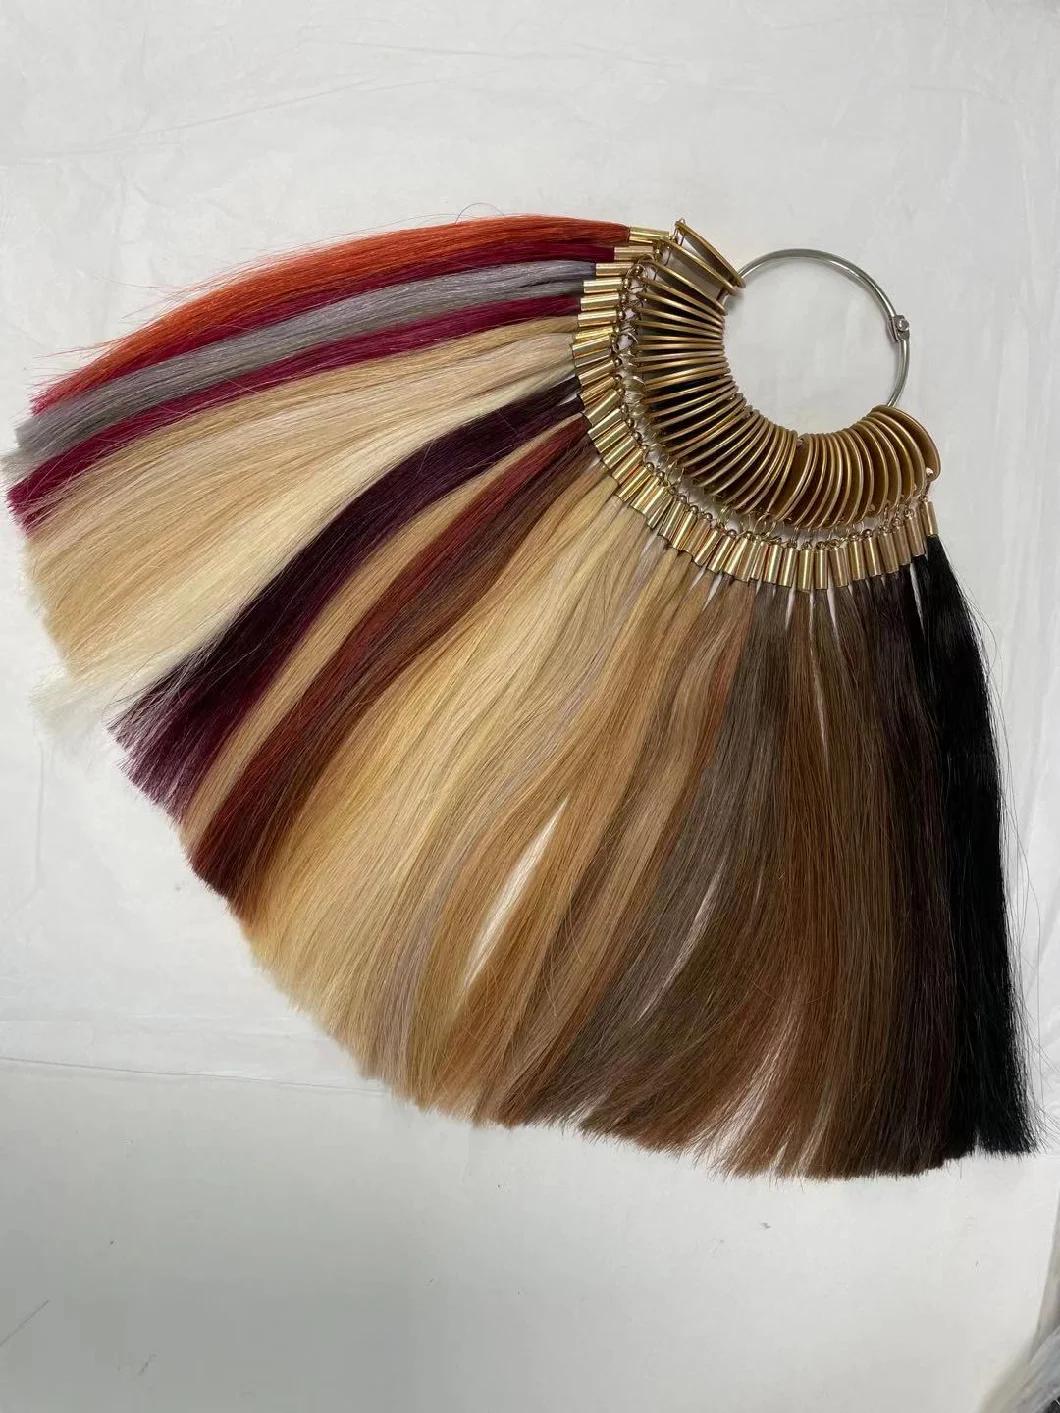 Wholesale Price Denghao Hair Factory Brazilian Hair Double Drawn High Quality All Types of Hair Extensions